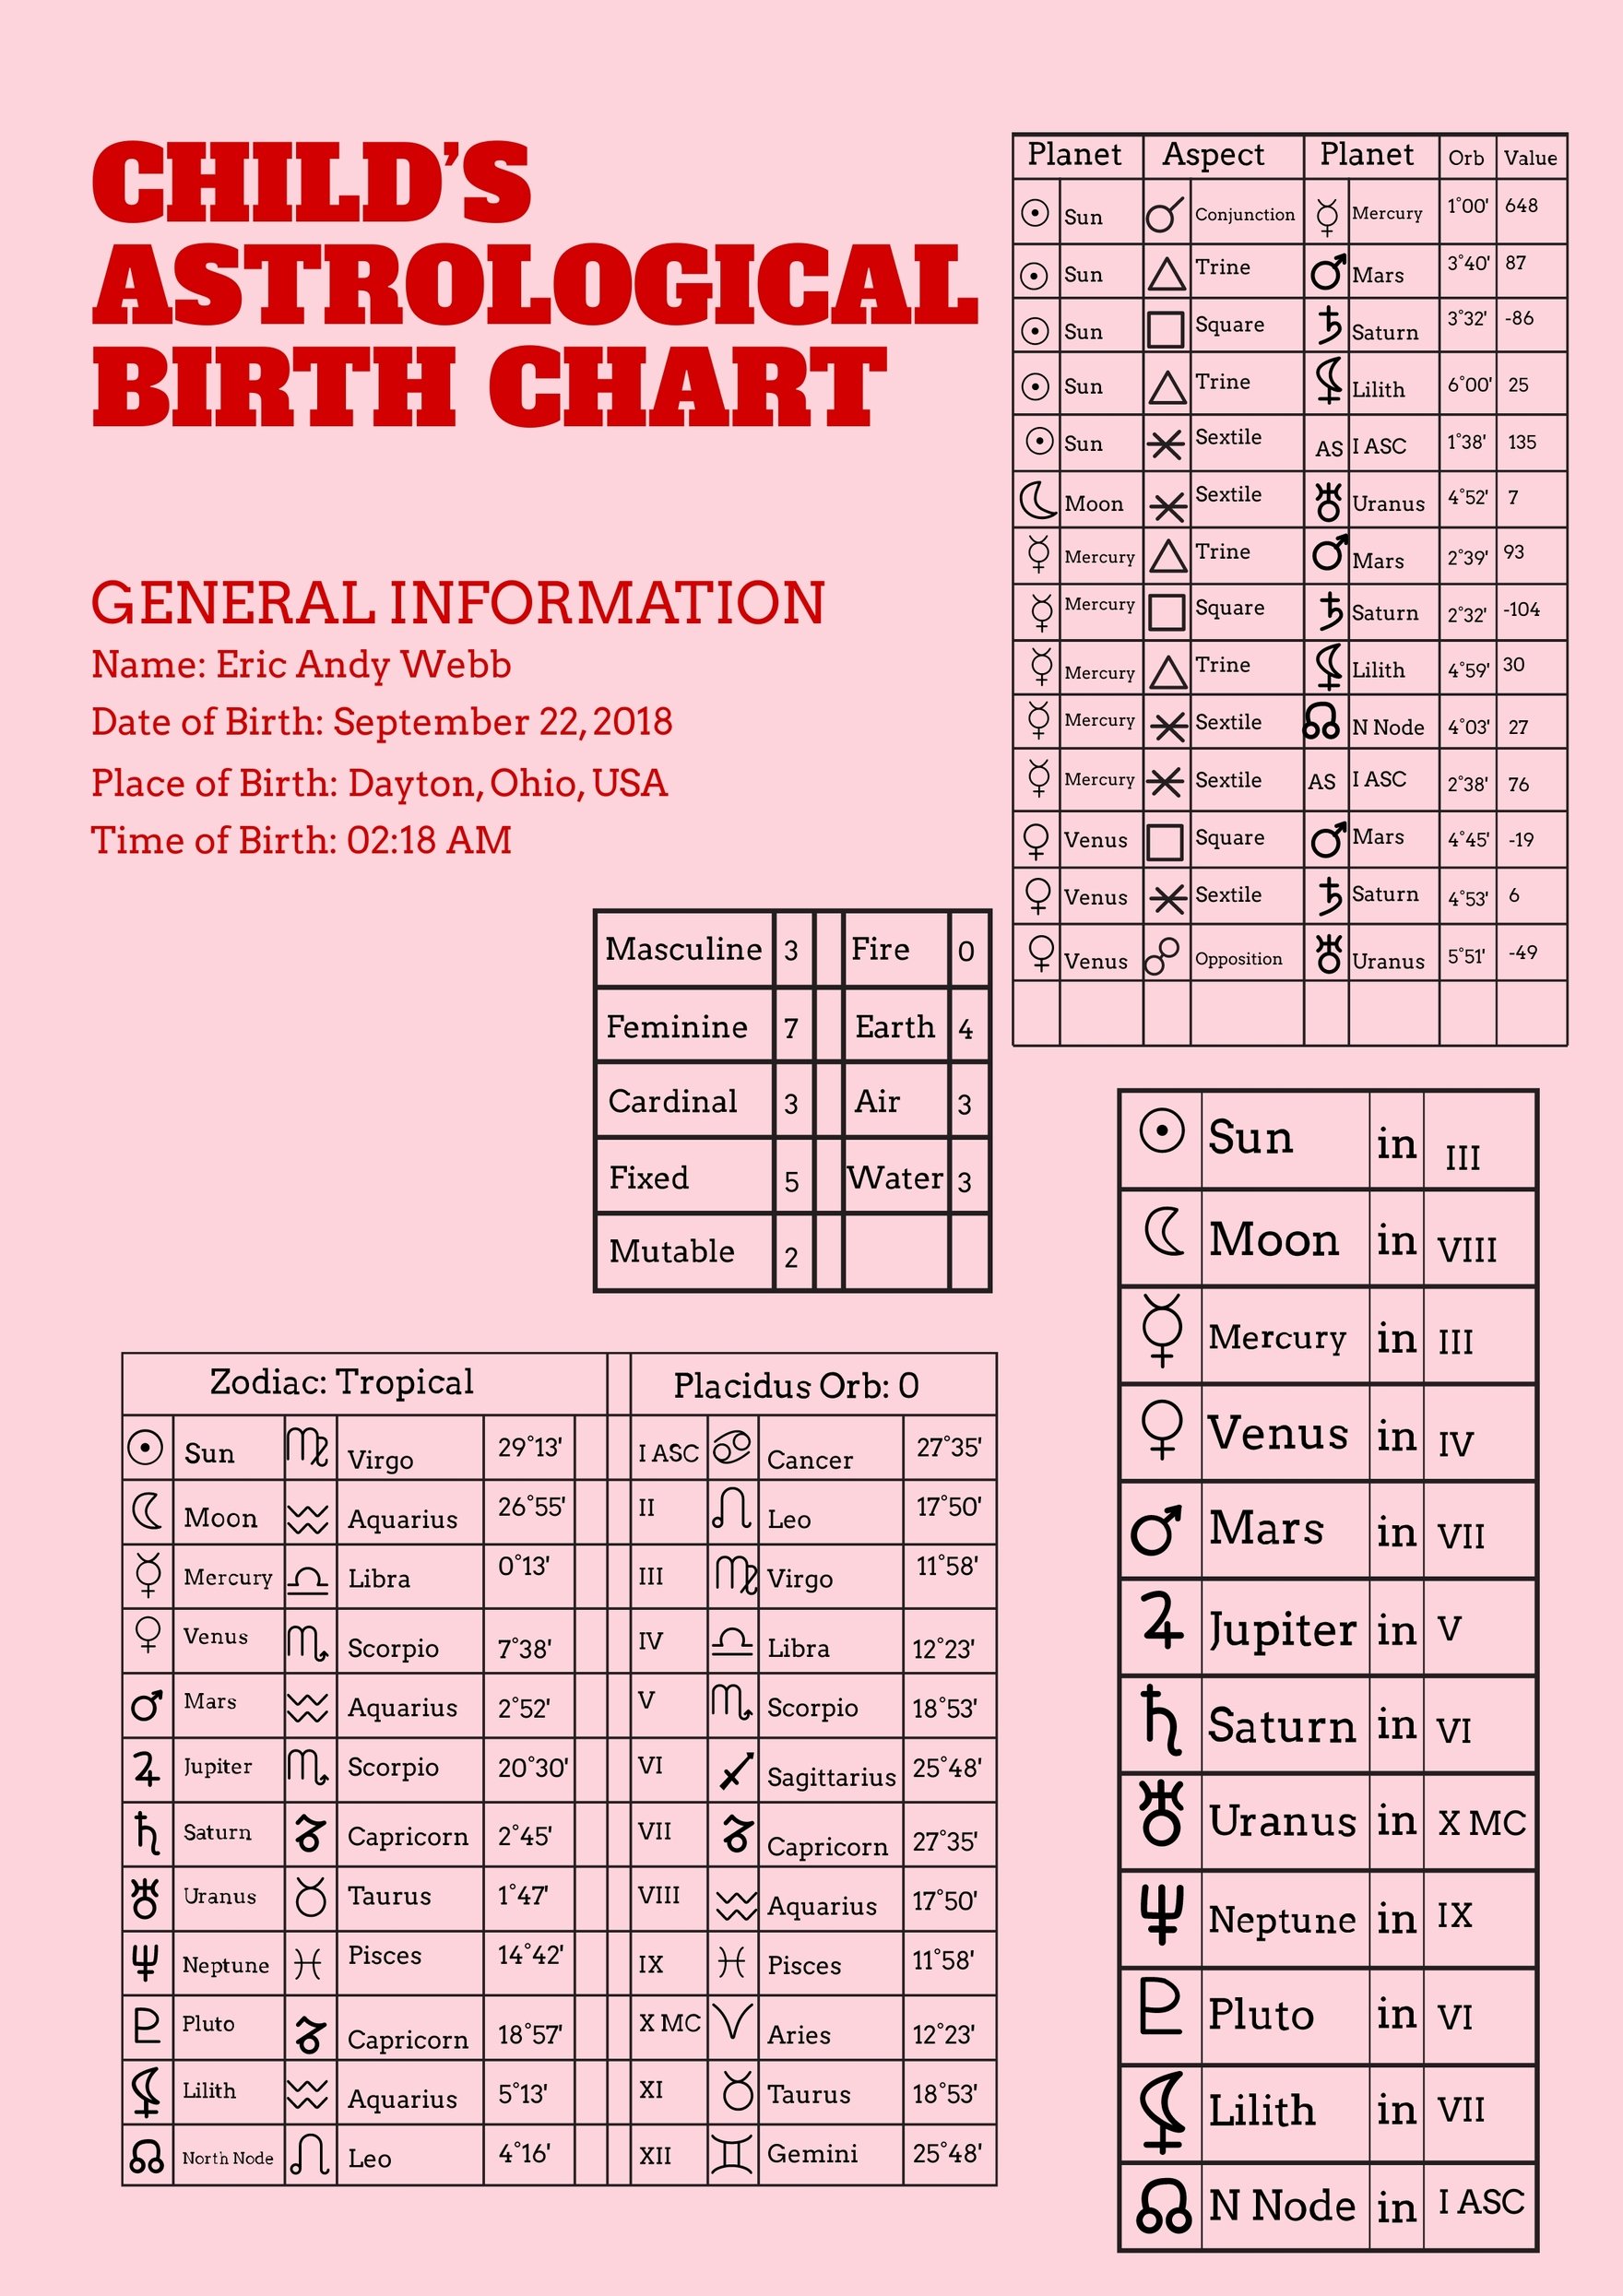 Child's Astrological Birth Chart Template in Illustrator, PDF